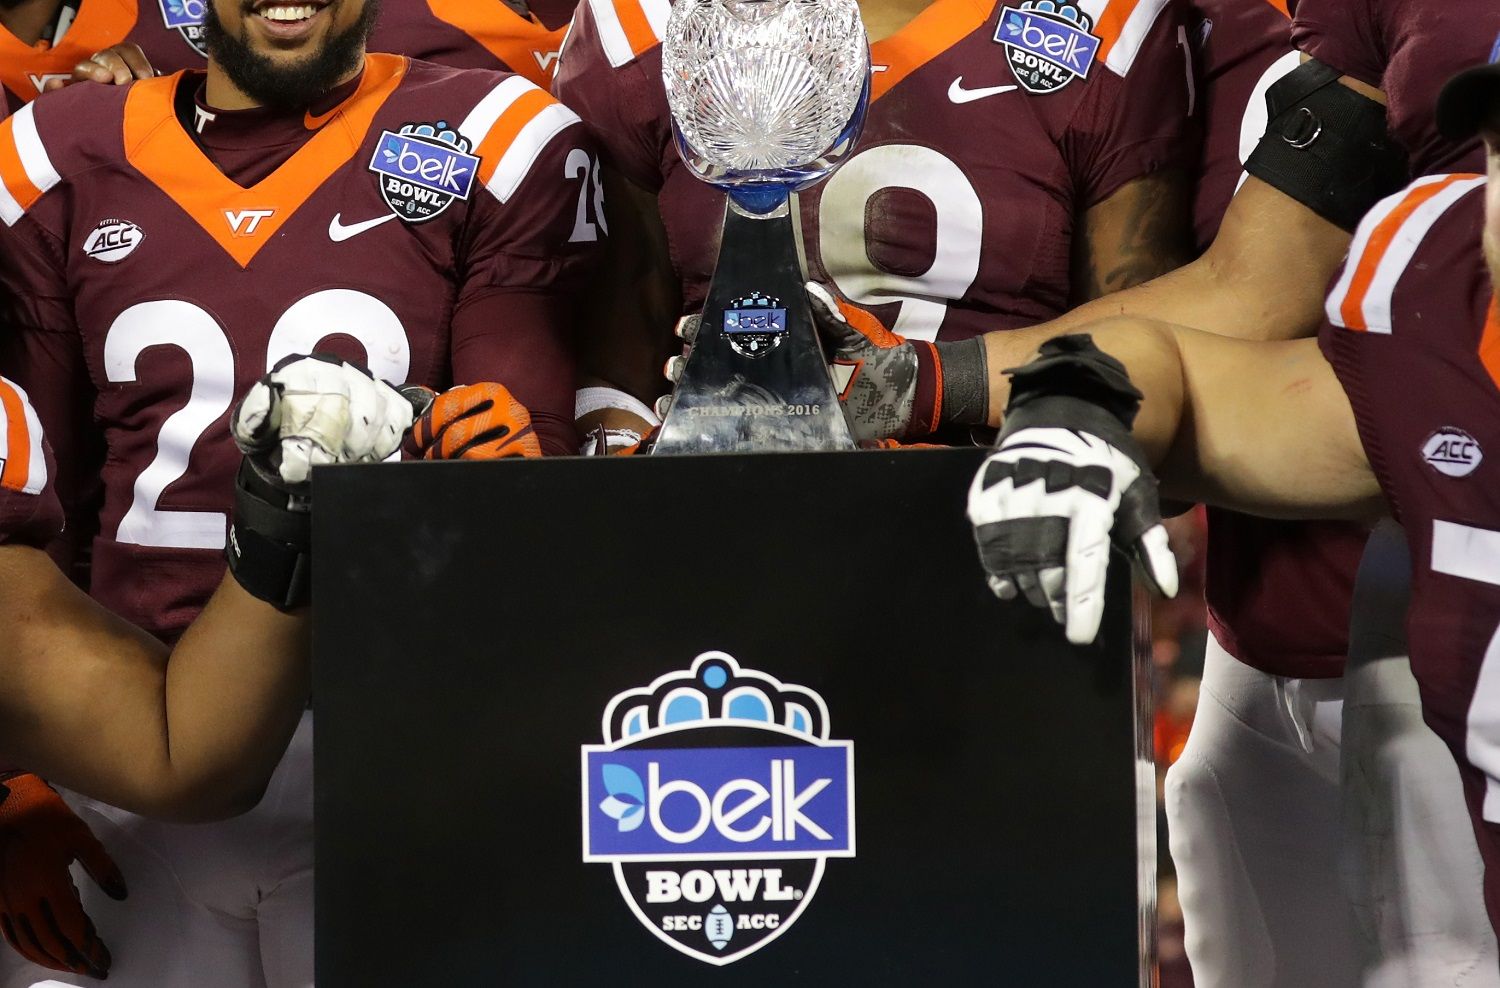 CHARLOTTE, NC - DECEMBER 29:  The Virginia Tech Hokies celebrate after defeating the Arkansas Razorbacks 35-24 in the Belk Bowl at Bank of America Stadium on December 29, 2016 in Charlotte, North Carolina.  (Photo by Streeter Lecka/Getty Images)